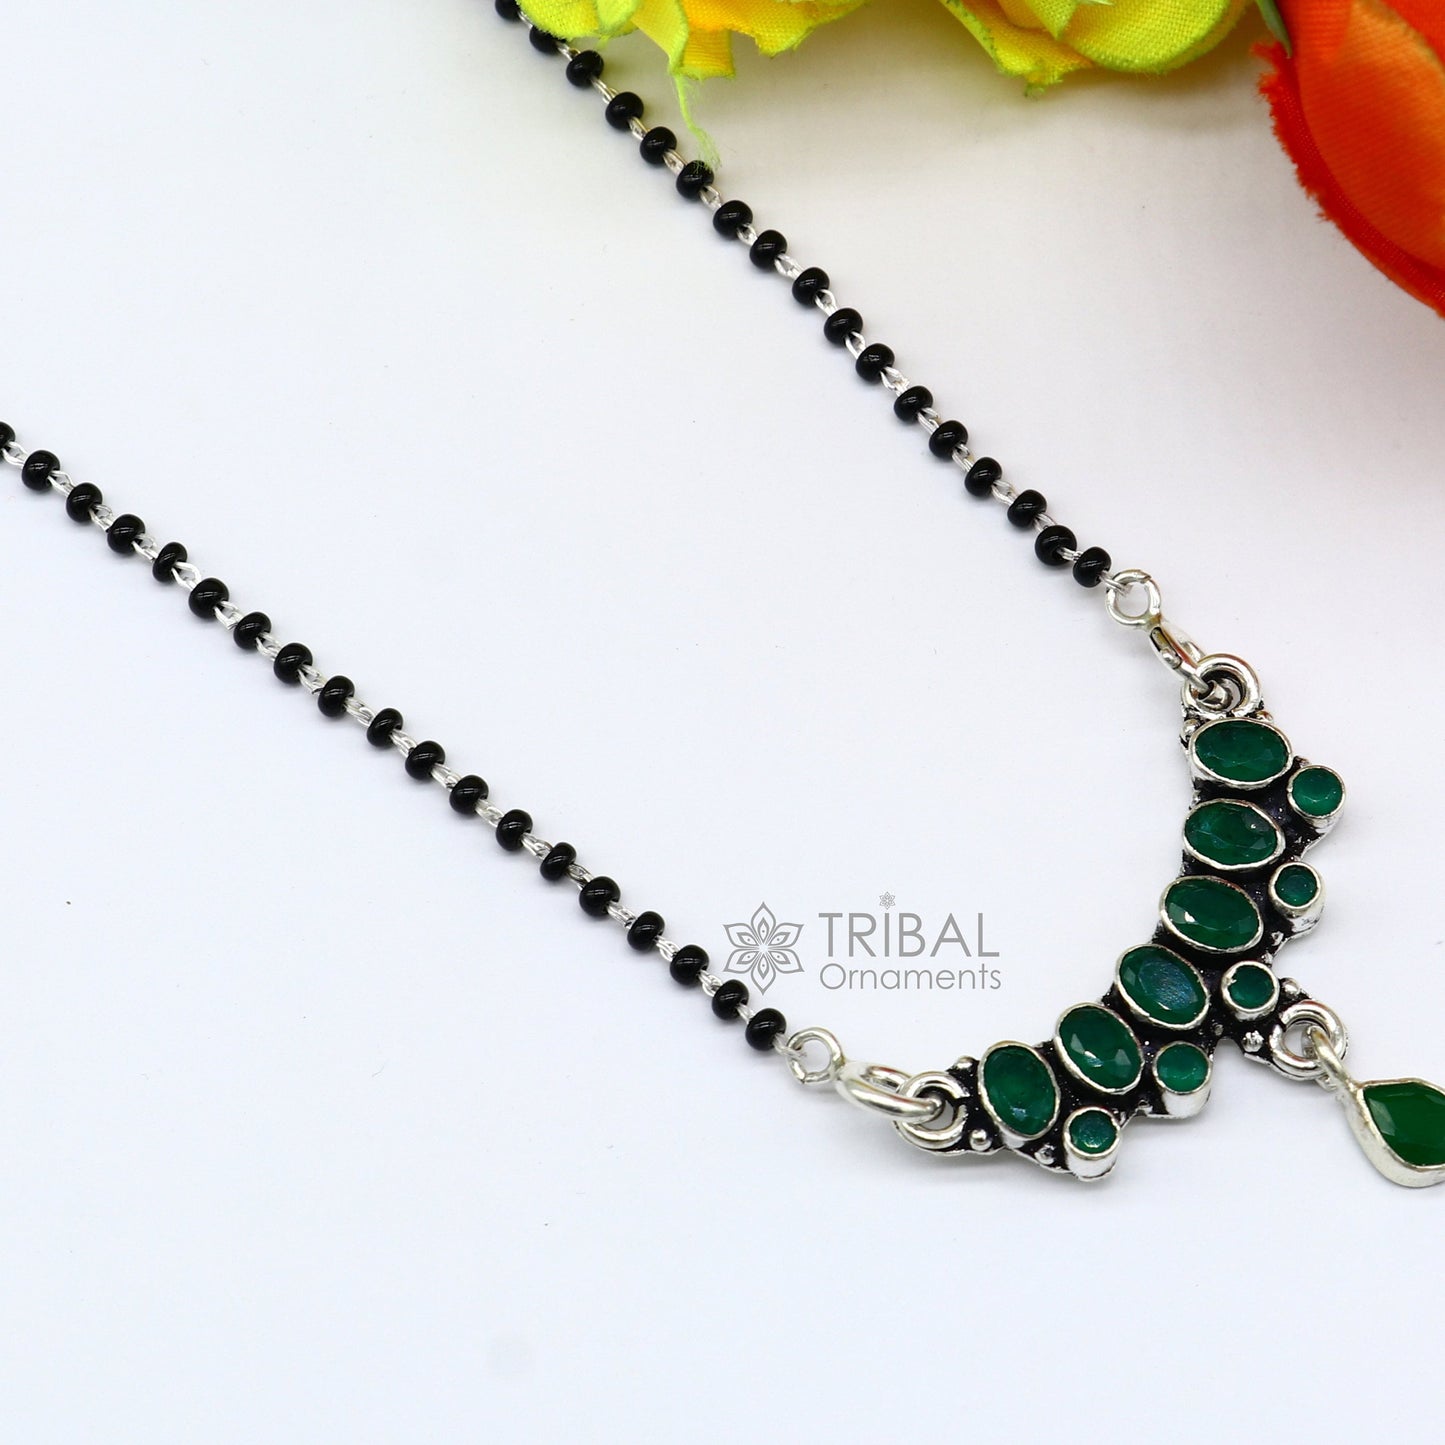 925 sterling silver black beads chain mangal sutra necklace for daily use brides Mangalsutra chunky necklace green stone pendant ms52 - TRIBAL ORNAMENTS